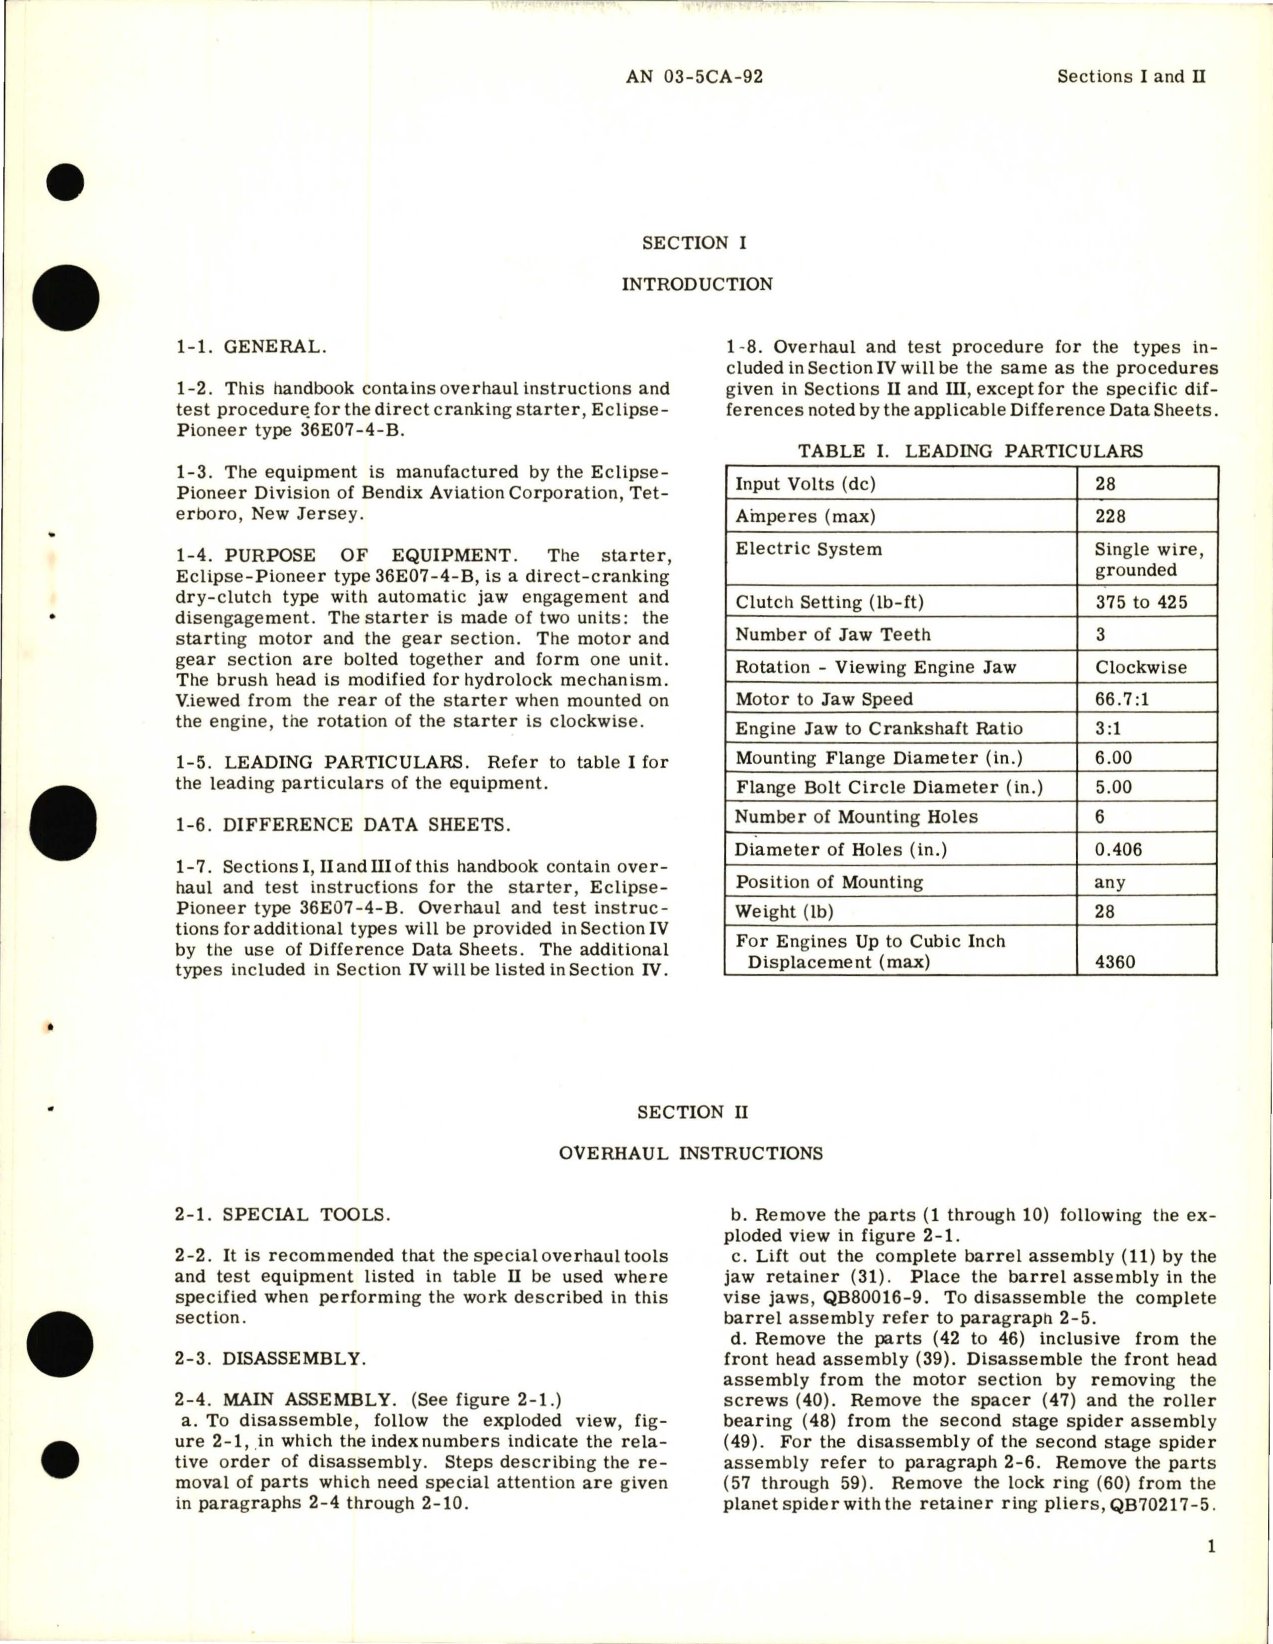 Sample page  5 from AirCorps Library document: Overhaul Instructions for Direct Cranking Starter Part 36E07-4-B